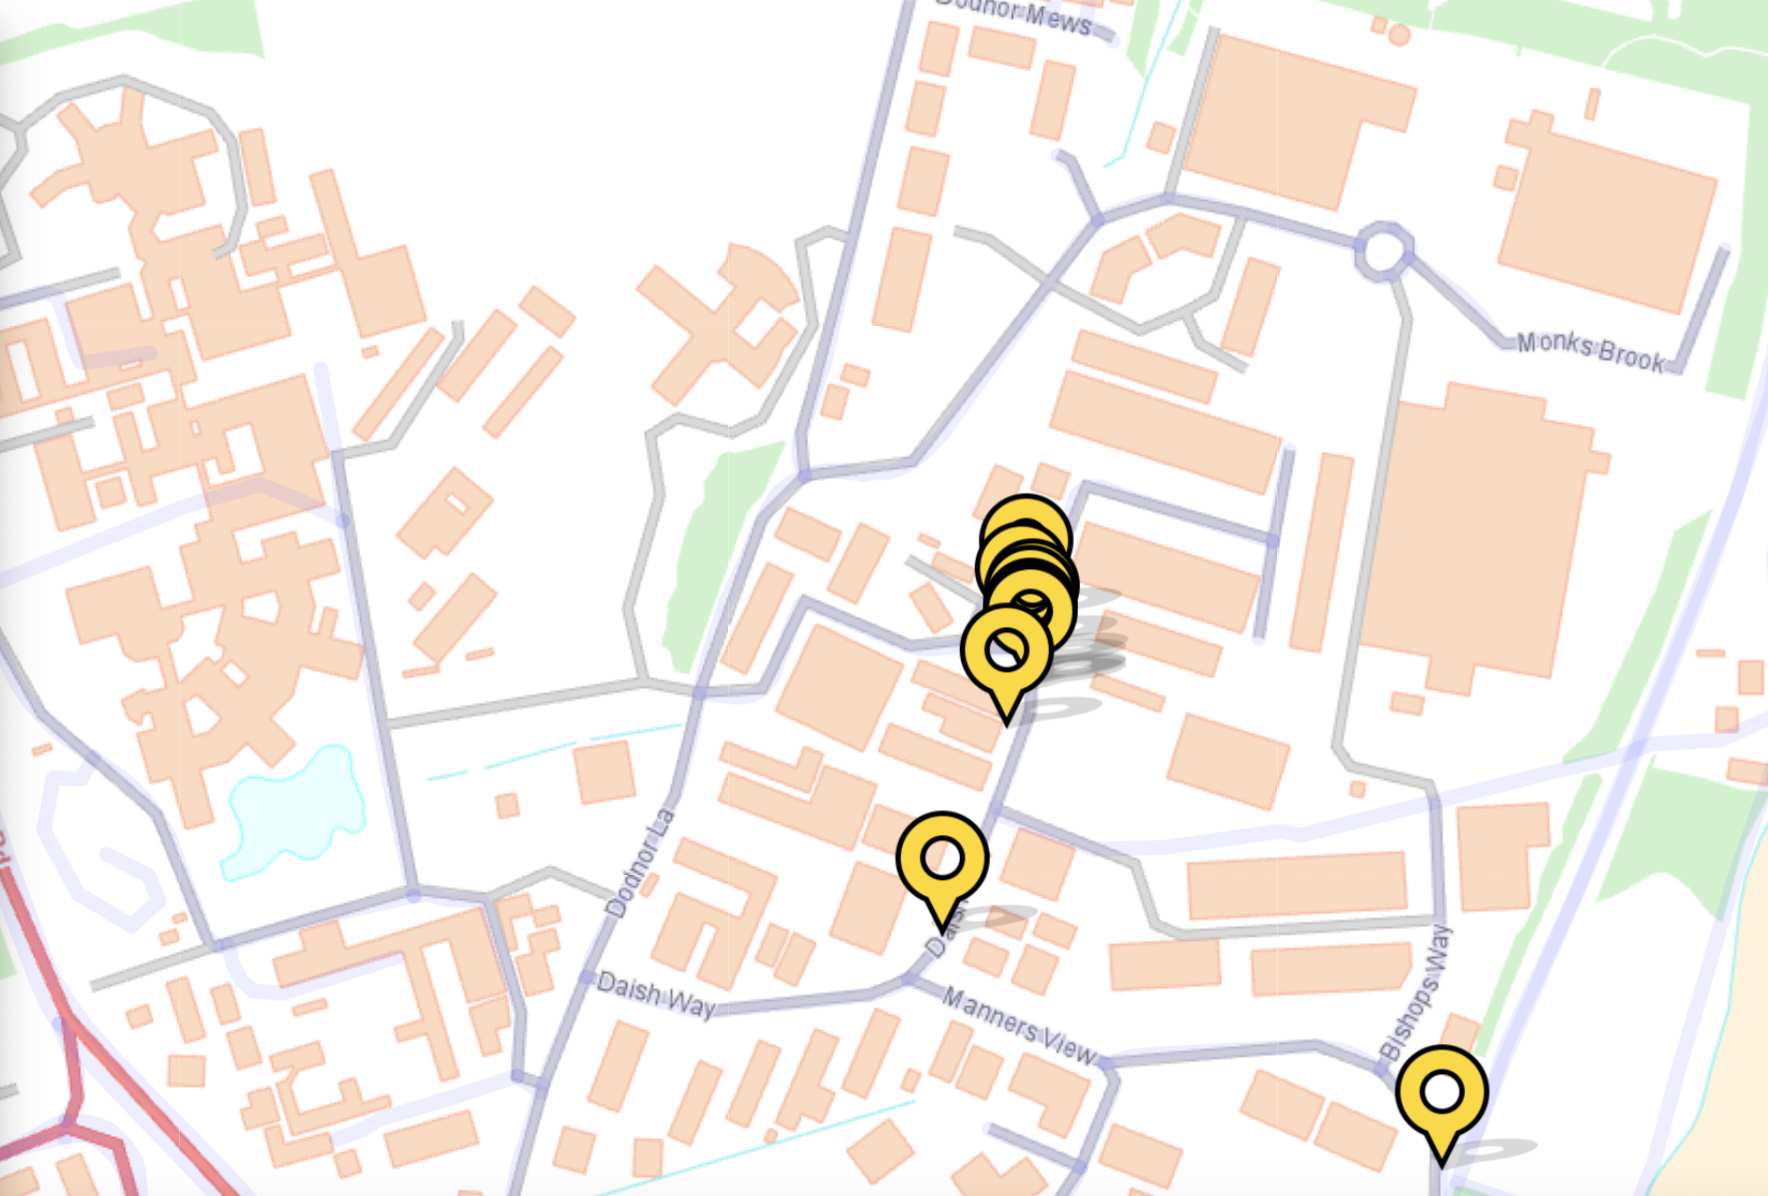 Map with yellow pins marking the location of reported problems